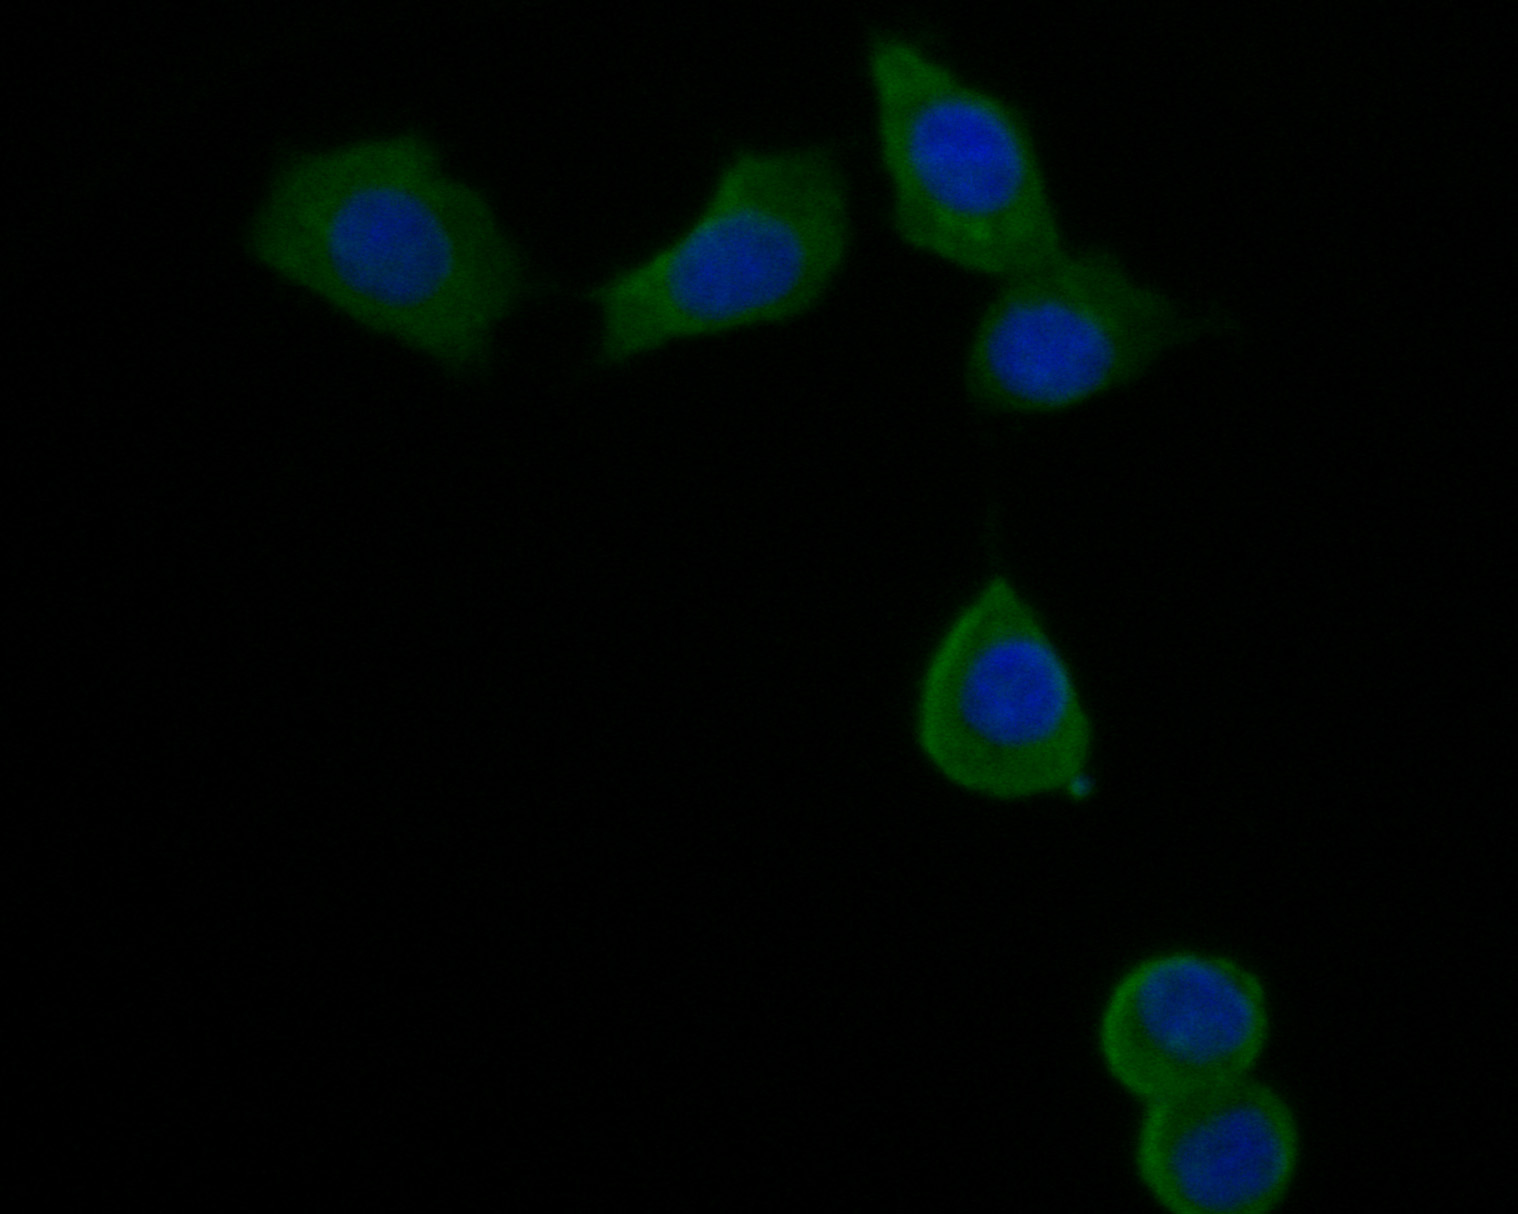 ICC staining of Dynamin 3 in SKOV-3 cells (green). Formalin fixed cells were permeabilized with 0.1% Triton X-100 in TBS for 10 minutes at room temperature and blocked with 1% Blocker BSA for 15 minutes at room temperature. Cells were probed with the primary antibody (HA500037, 1/200) for 1 hour at room temperature, washed with PBS. Alexa Fluor®488 Goat anti-Rabbit IgG was used as the secondary antibody at 1/1,000 dilution. The nuclear counter stain is DAPI (blue).